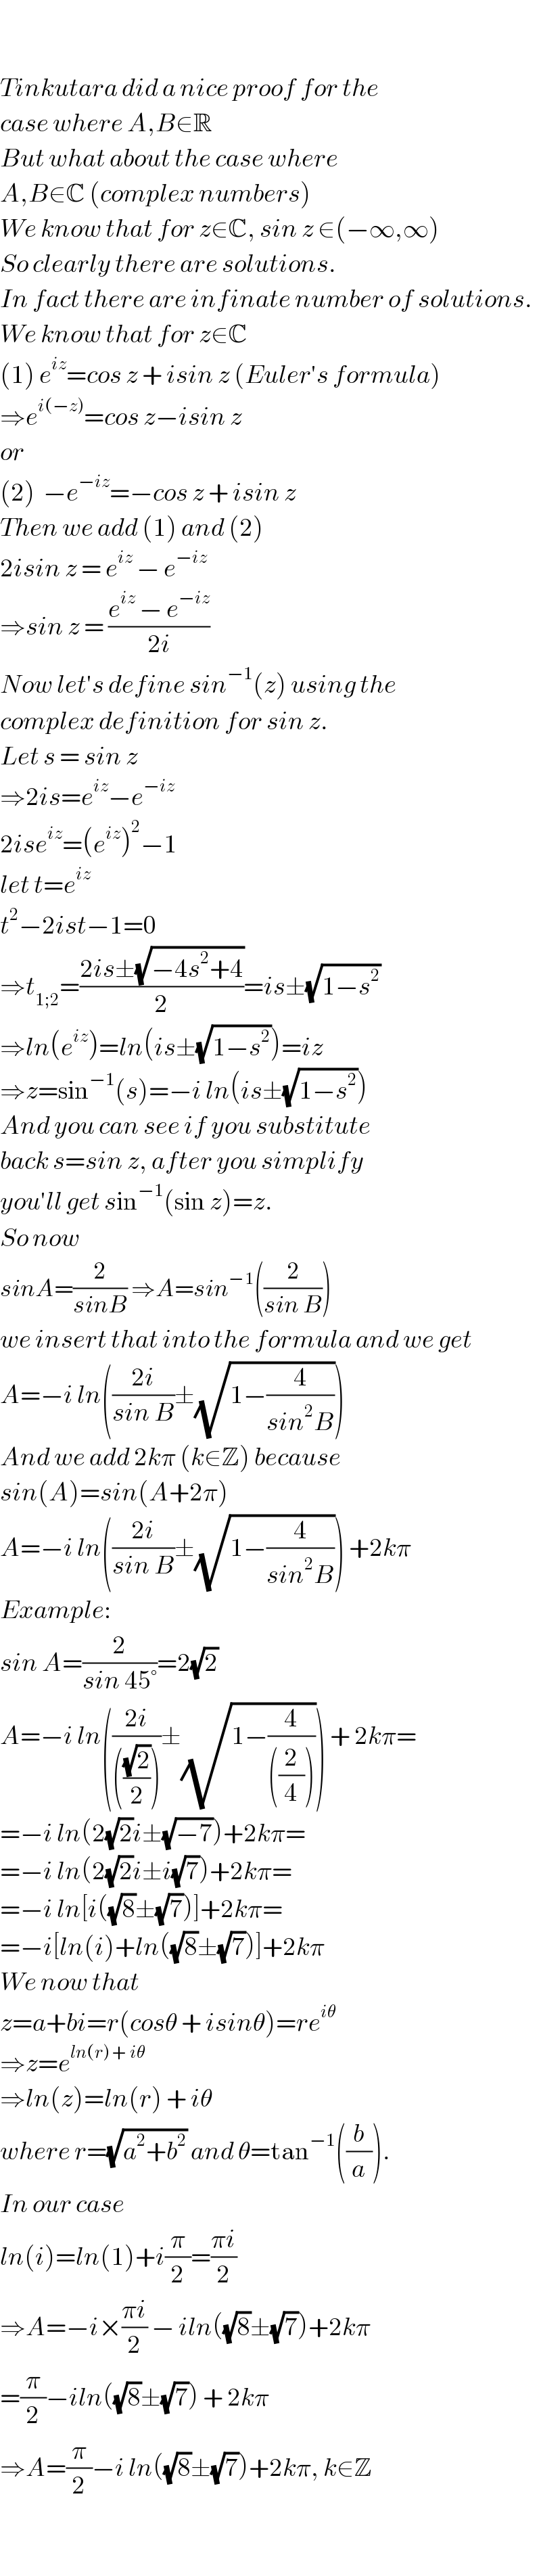     Tinkutara did a nice proof for the  case where A,B∈R  But what about the case where  A,B∈C (complex numbers)  We know that for z∈C, sin z ∈(−∞,∞)  So clearly there are solutions.  In fact there are infinate number of solutions.   We know that for z∈C  (1) e^(iz) =cos z + isin z (Euler′s formula)  ⇒e^(i(−z)) =cos z−isin z  or  (2)  −e^(−iz) =−cos z + isin z  Then we add (1) and (2)  2isin z = e^(iz)  − e^(−iz)   ⇒sin z = ((e^(iz)  − e^(−iz) )/(2i))  Now let′s define sin^(−1) (z) using the  complex definition for sin z.  Let s = sin z  ⇒2is=e^(iz) −e^(−iz)   2ise^(iz) =(e^(iz) )^2 −1  let t=e^(iz)   t^2 −2ist−1=0  ⇒t_(1;2) =((2is±(√(−4s^2 +4)))/2)=is±(√(1−s^2 ))  ⇒ln(e^(iz) )=ln(is±(√(1−s^2 )))=iz  ⇒z=sin^(−1) (s)=−i ln(is±(√(1−s^2 )))  And you can see if you substitute  back s=sin z, after you simplify  you′ll get sin^(−1) (sin z)=z.  So now   sinA=(2/(sinB)) ⇒A=sin^(−1) ((2/(sin B)))  we insert that into the formula and we get  A=−i ln(((2i)/(sin B))±(√(1−(4/(sin^2 B)))))  And we add 2kπ (k∈Z) because  sin(A)=sin(A+2π)  A=−i ln(((2i)/(sin B))±(√(1−(4/(sin^2 B))))) +2kπ  Example:  sin A=(2/(sin 45°))=2(√2)  A=−i ln(((2i)/((((√2)/2))))±(√(1−(4/(((2/4))))))) + 2kπ=  =−i ln(2(√2)i±(√(−7)))+2kπ=  =−i ln(2(√2)i±i(√7))+2kπ=  =−i ln[i((√8)±(√7))]+2kπ=  =−i[ln(i)+ln((√8)±(√7))]+2kπ  We now that   z=a+bi=r(cosθ + isinθ)=re^(iθ)   ⇒z=e^(ln(r) + iθ)   ⇒ln(z)=ln(r) + iθ  where r=(√(a^2 +b^2 )) and θ=tan^(−1) ((b/a)).  In our case  ln(i)=ln(1)+i(π/2)=((πi)/2)  ⇒A=−i×((πi)/2) − iln((√8)±(√7))+2kπ  =(π/2)−iln((√8)±(√7)) + 2kπ  ⇒A=(π/2)−i ln((√8)±(√7))+2kπ, k∈Z  